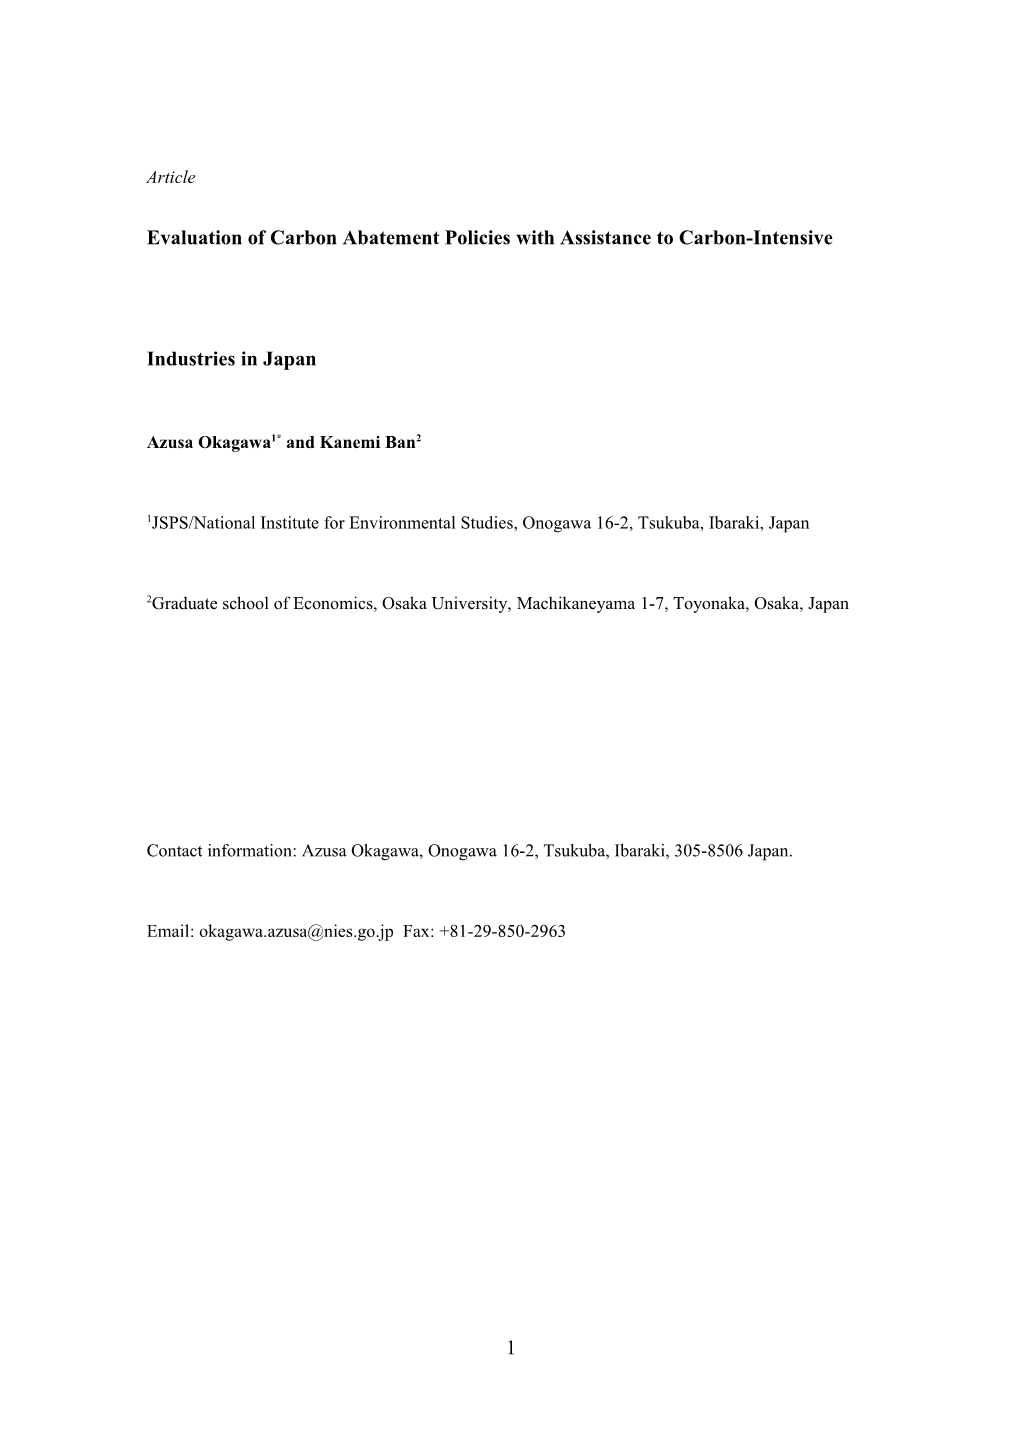 Evaluation of Carbon Abatement Policies with Assistance to Carbon-Intensive Industries